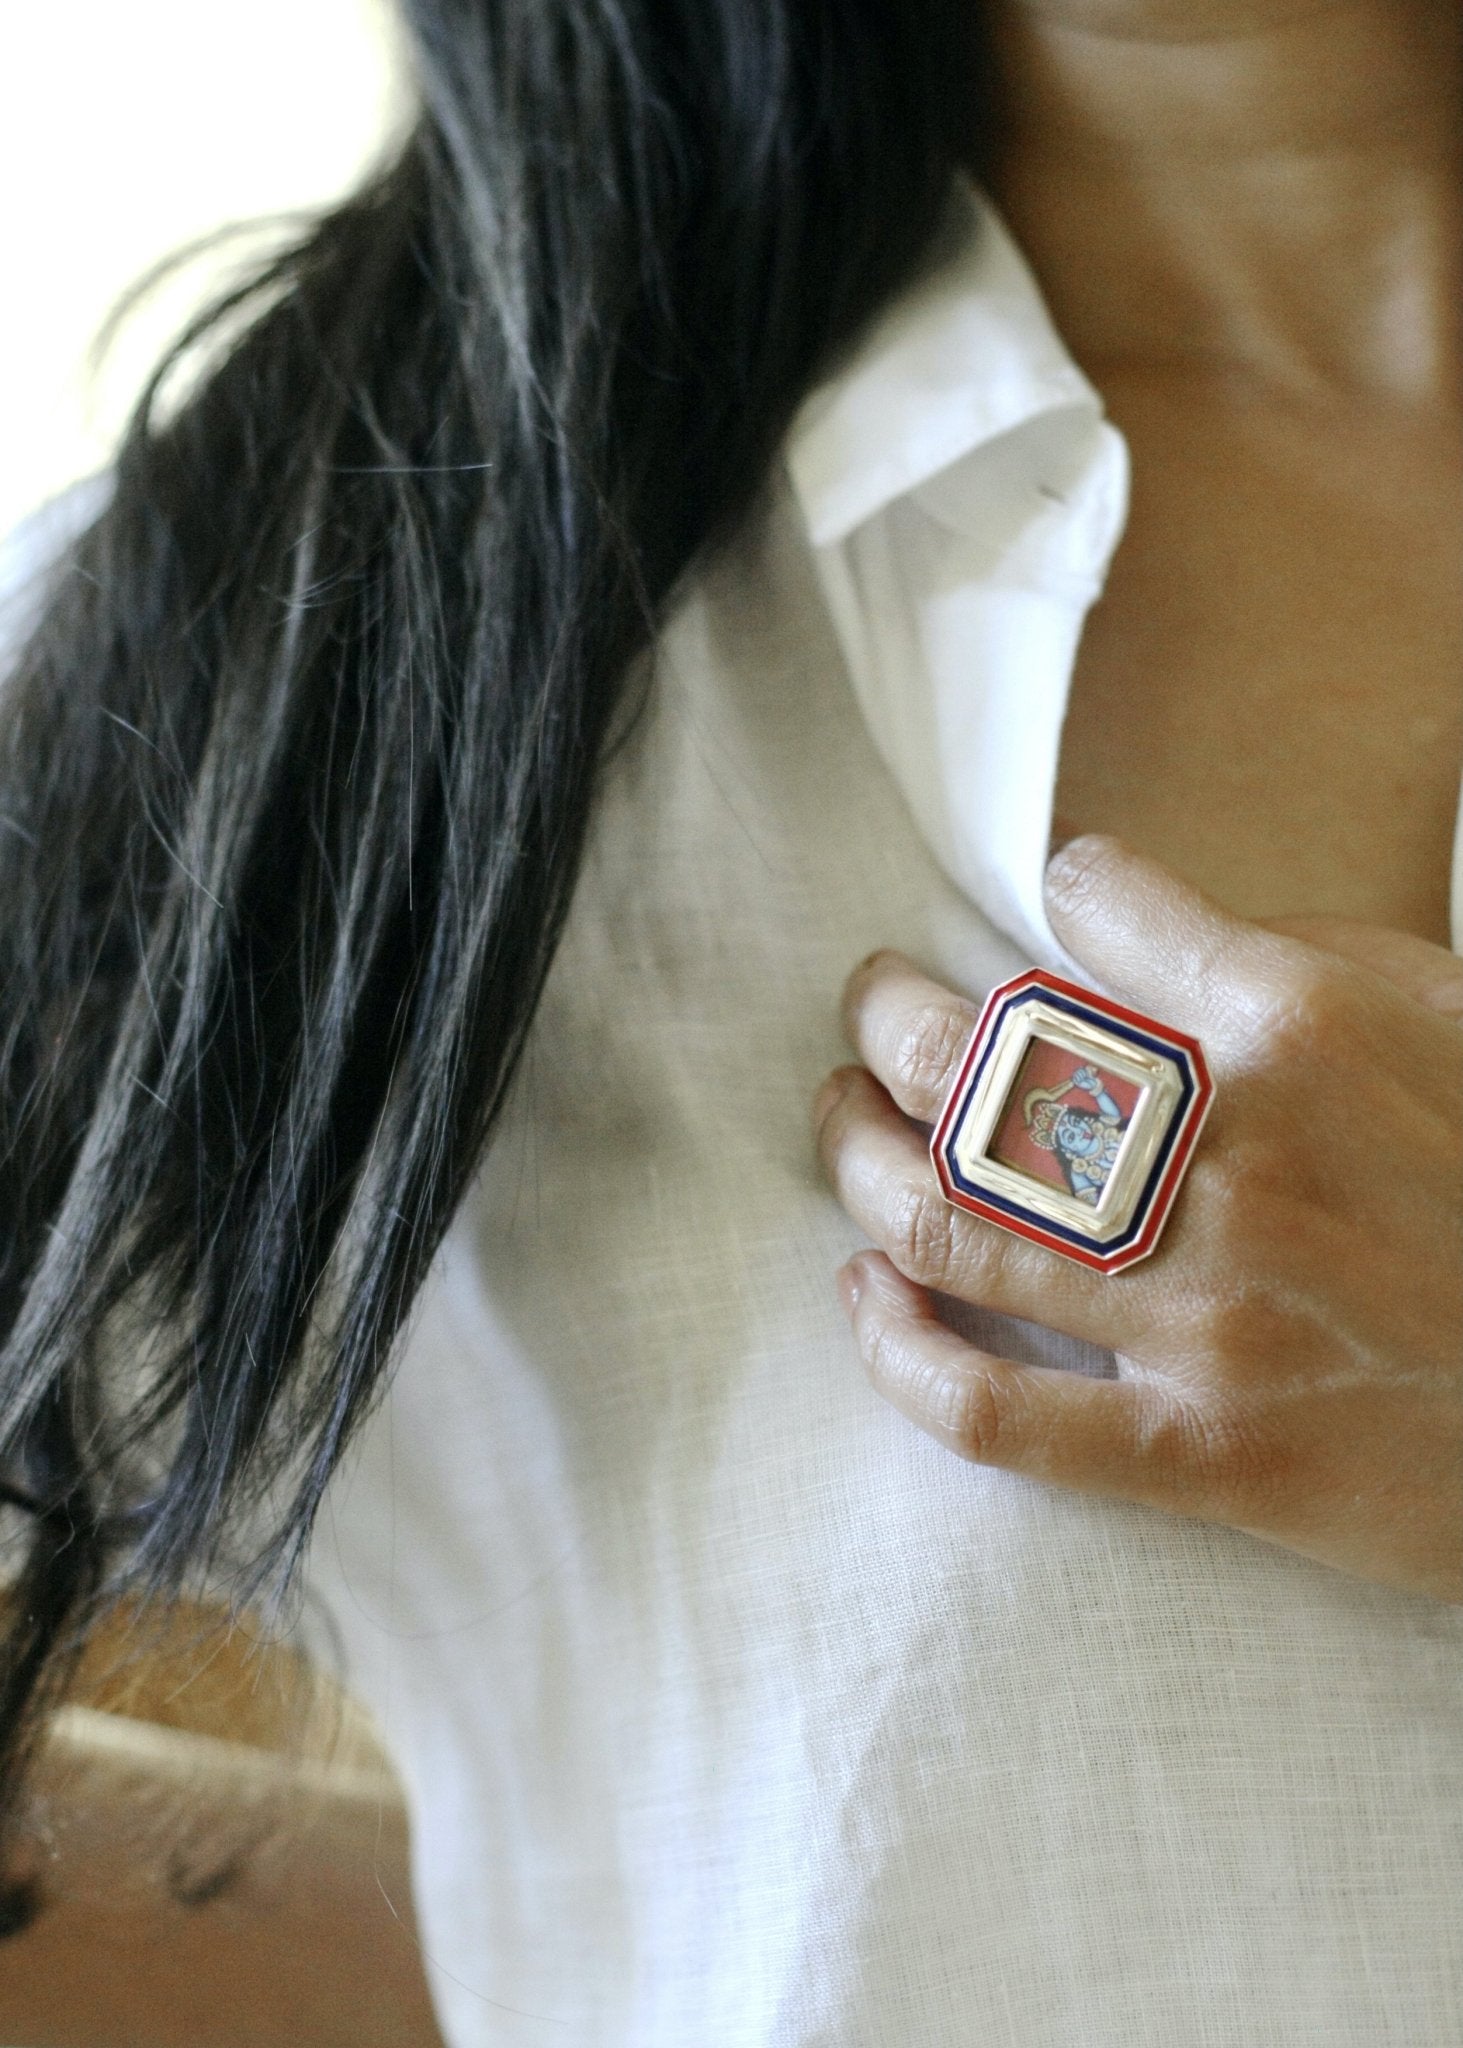 Magnificient, and fierce, 'Kali' (goddess) statement ring - Lai